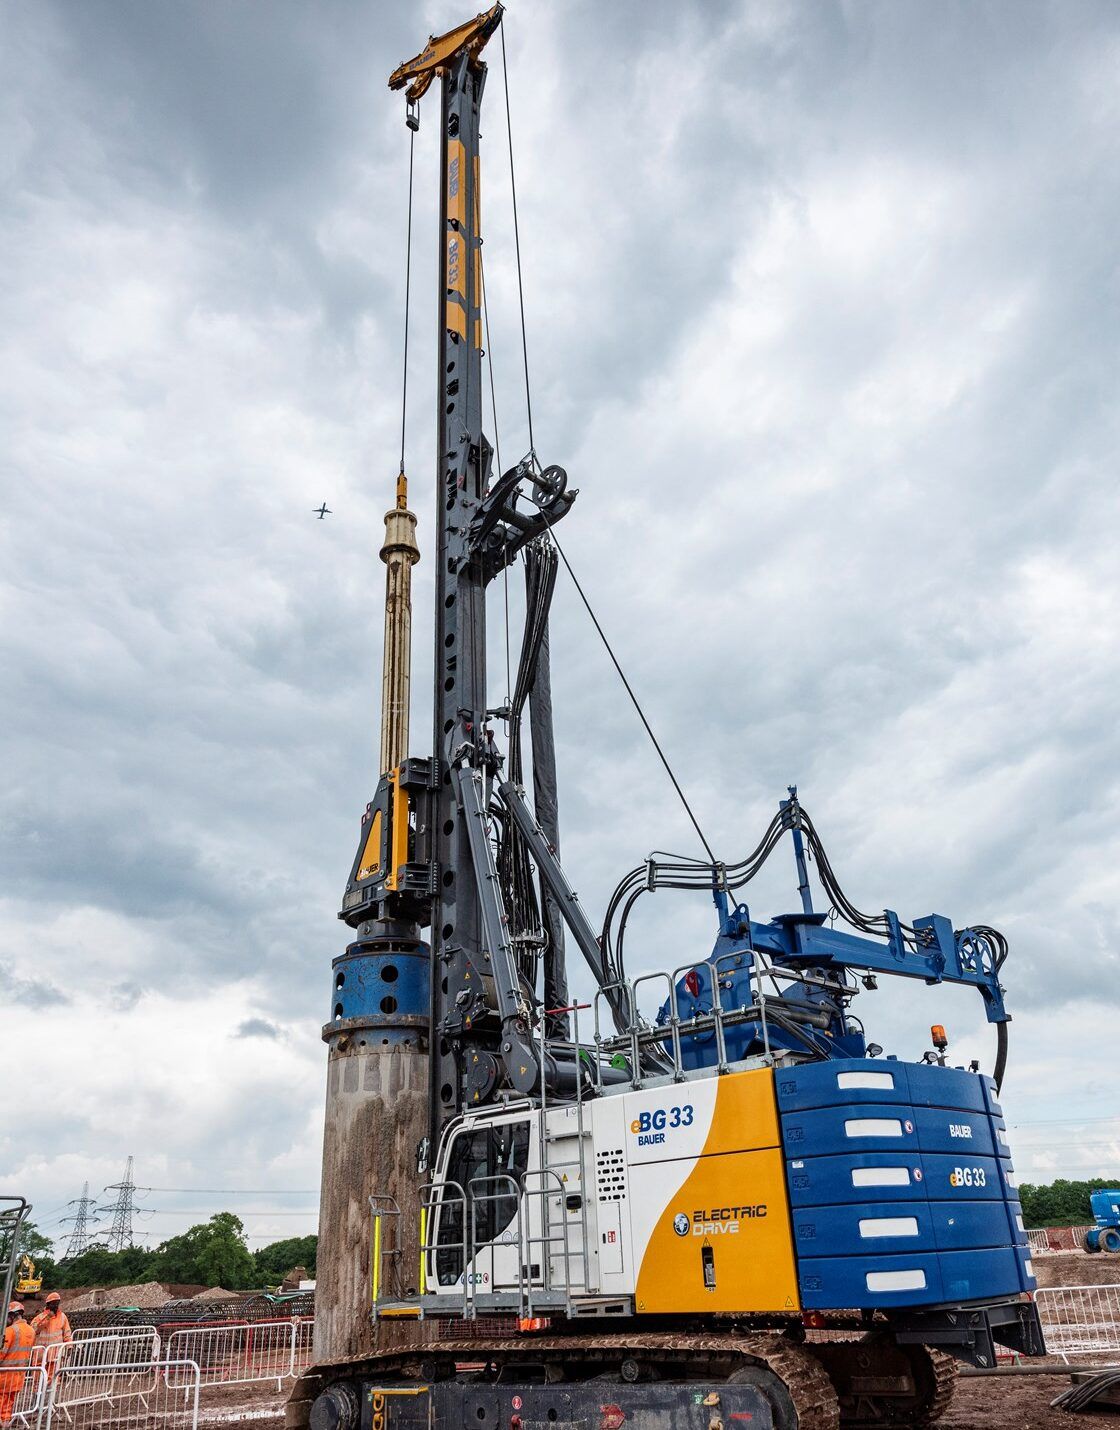 HS2 Trials ‘First of a Kind’ Electric Drilling Rig